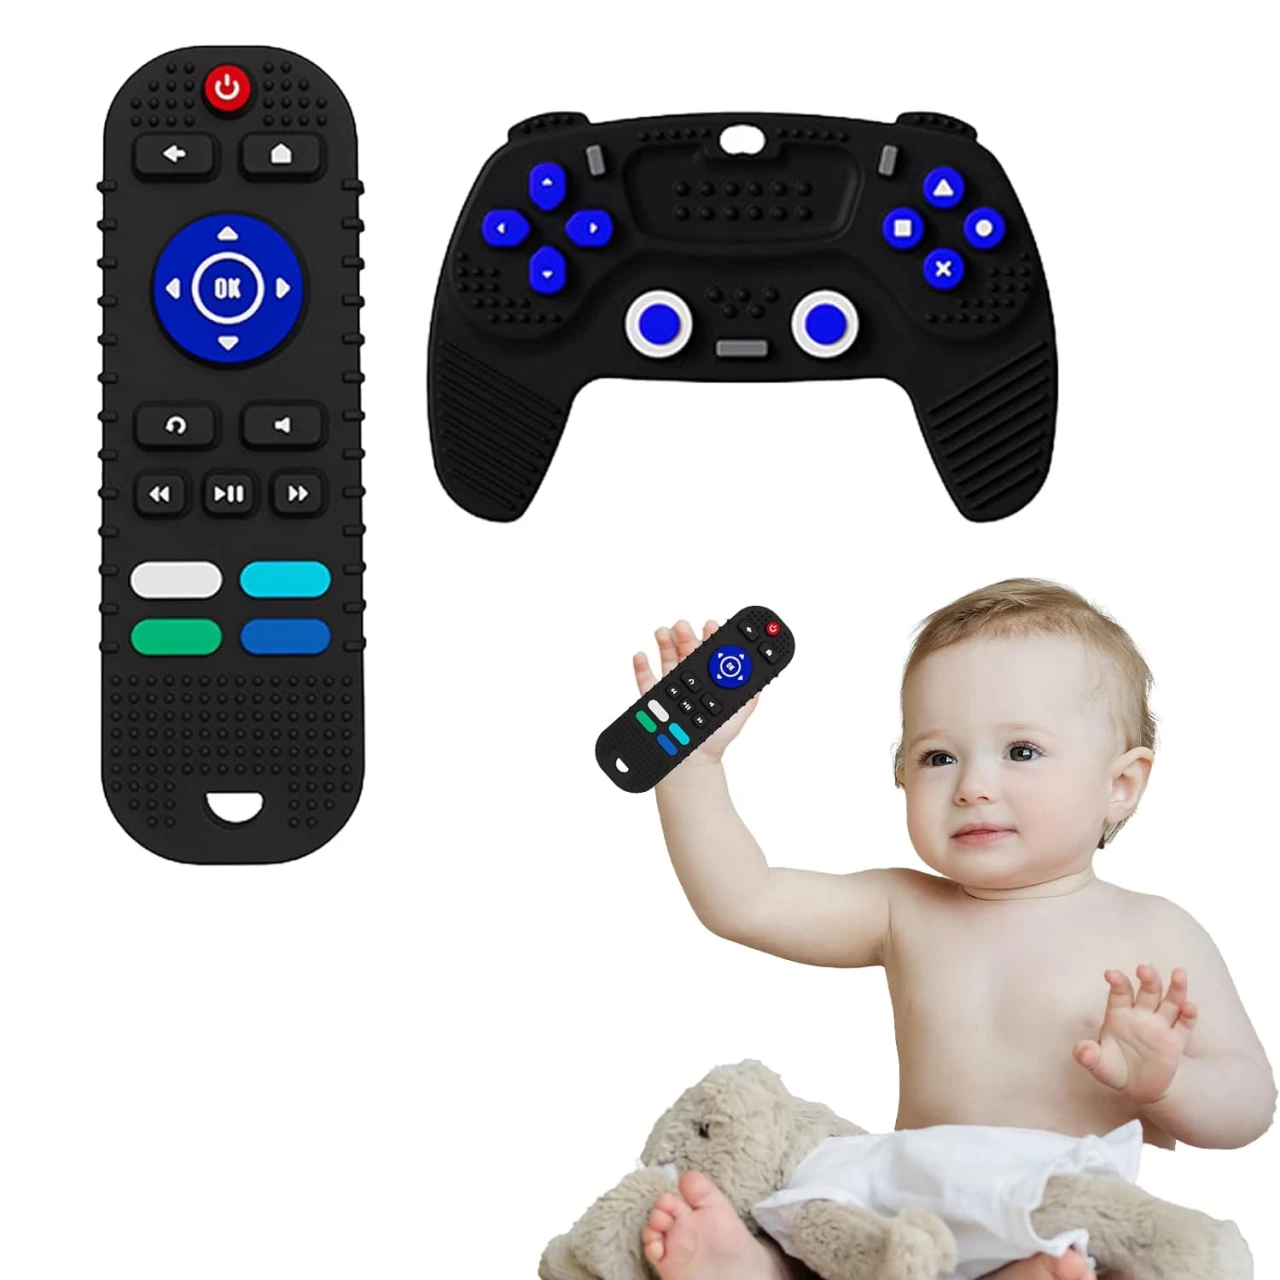 2-Pack Baby Teether Toys Silicone Toddler Sensory Toy Chew Toys Educational, TV Remote Control Shape Teething Toys for Babies 6-18 Months (Black)